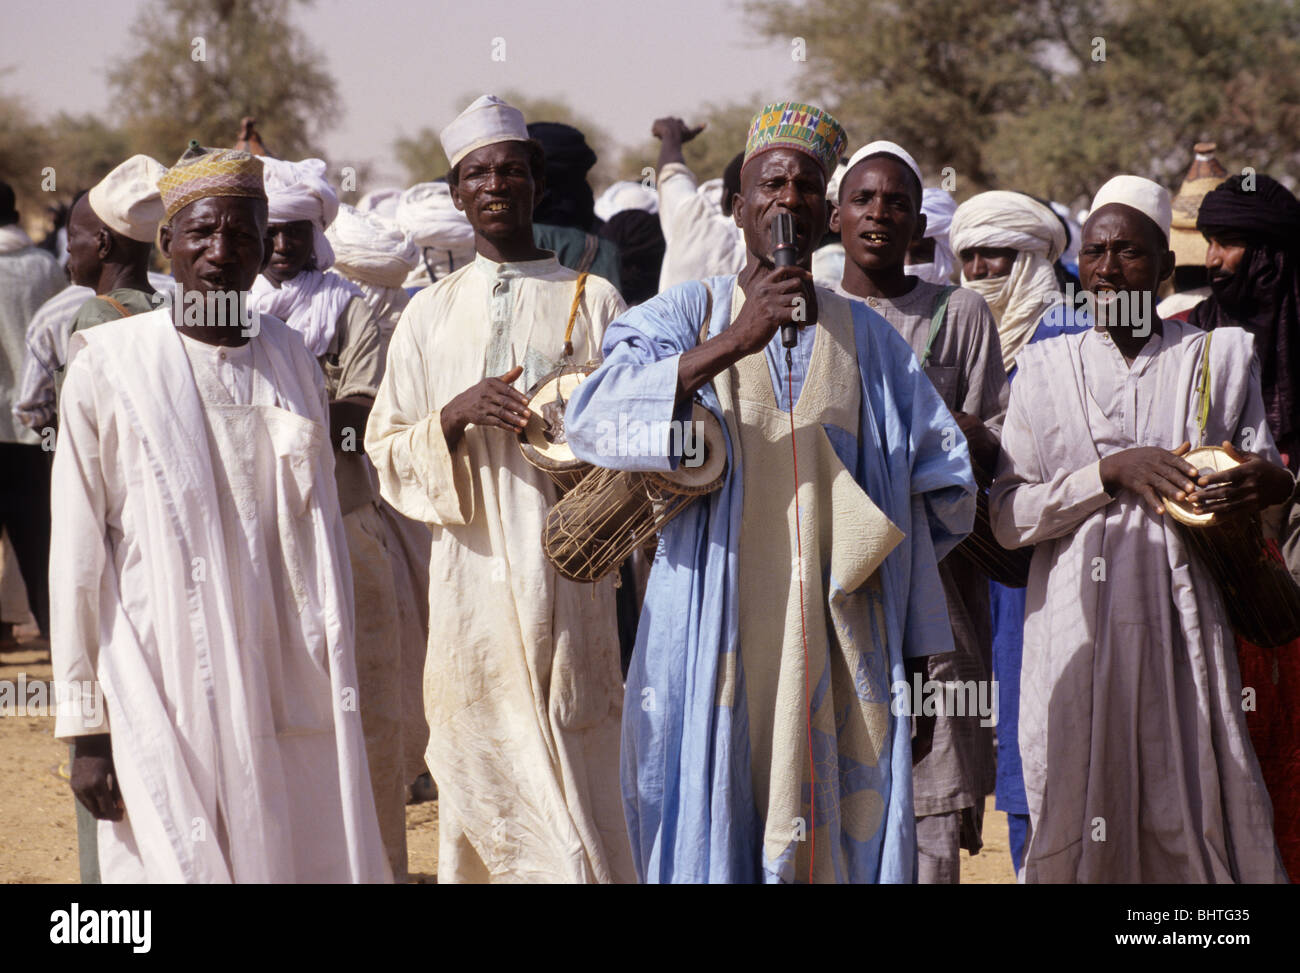 Akadaney, Central Niger, West Africa. Fulani Nomads. Men Welcoming Guests by Singing at Annual Gathering, a Gerewol. Stock Photo